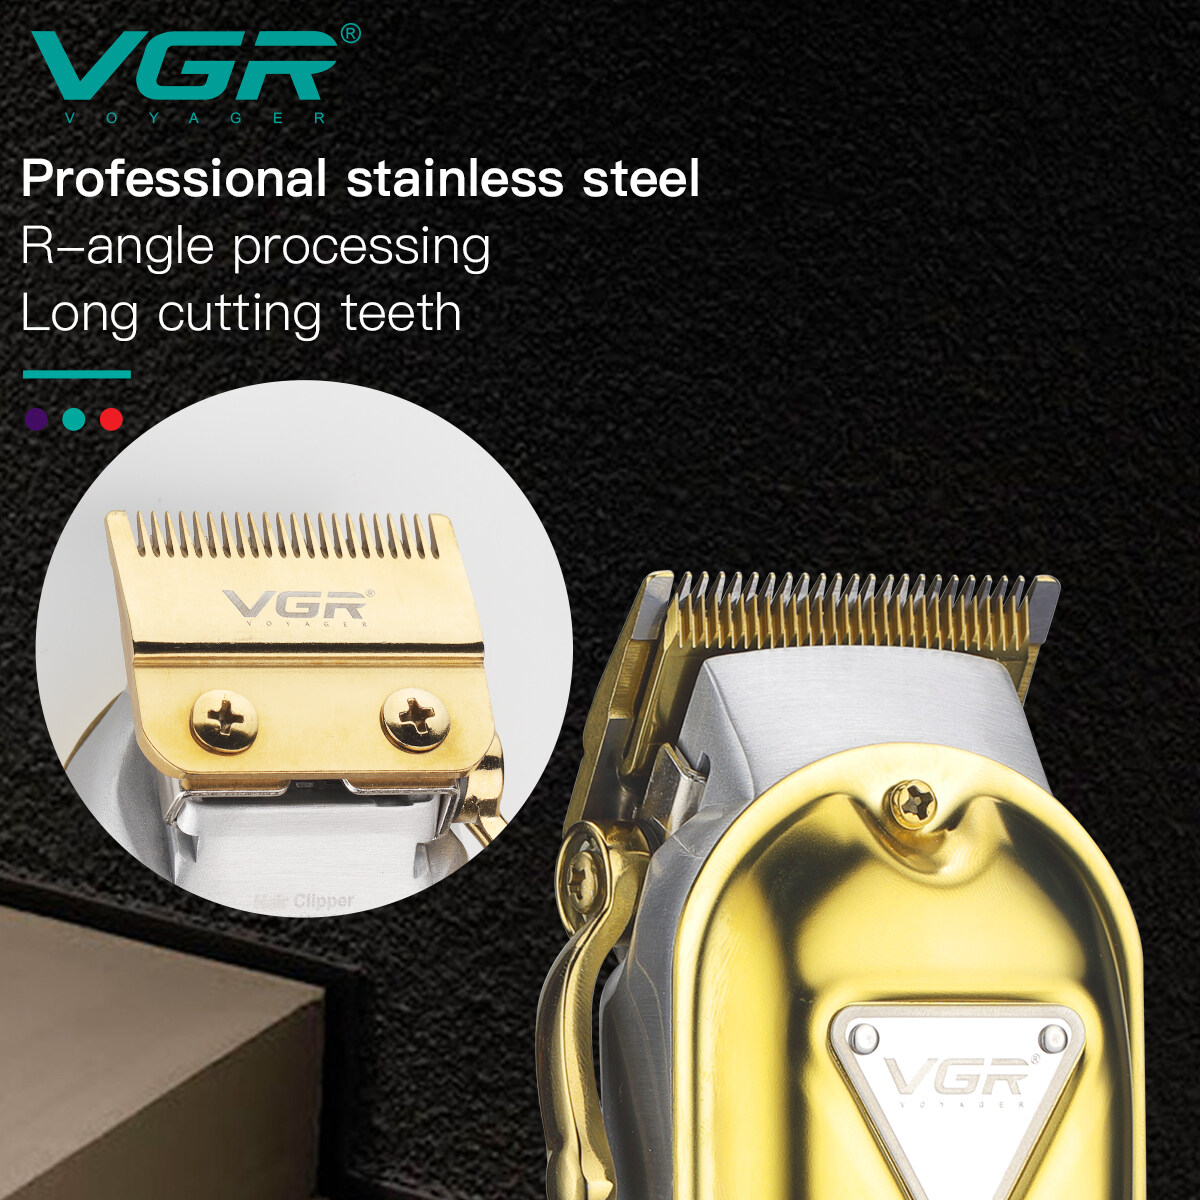 china rechargeable cordless hair clipper, cordless rechargeable hair clipper factory, cordless rechargeable hair clipper supplier, Cordless Rechargeable Hair Clippers, Custom Rechargeable Cordless Hair Clippers, Rechargeable Cordless Hair Clippers, Wholesale Rechargeable Cordless Hair Clippers